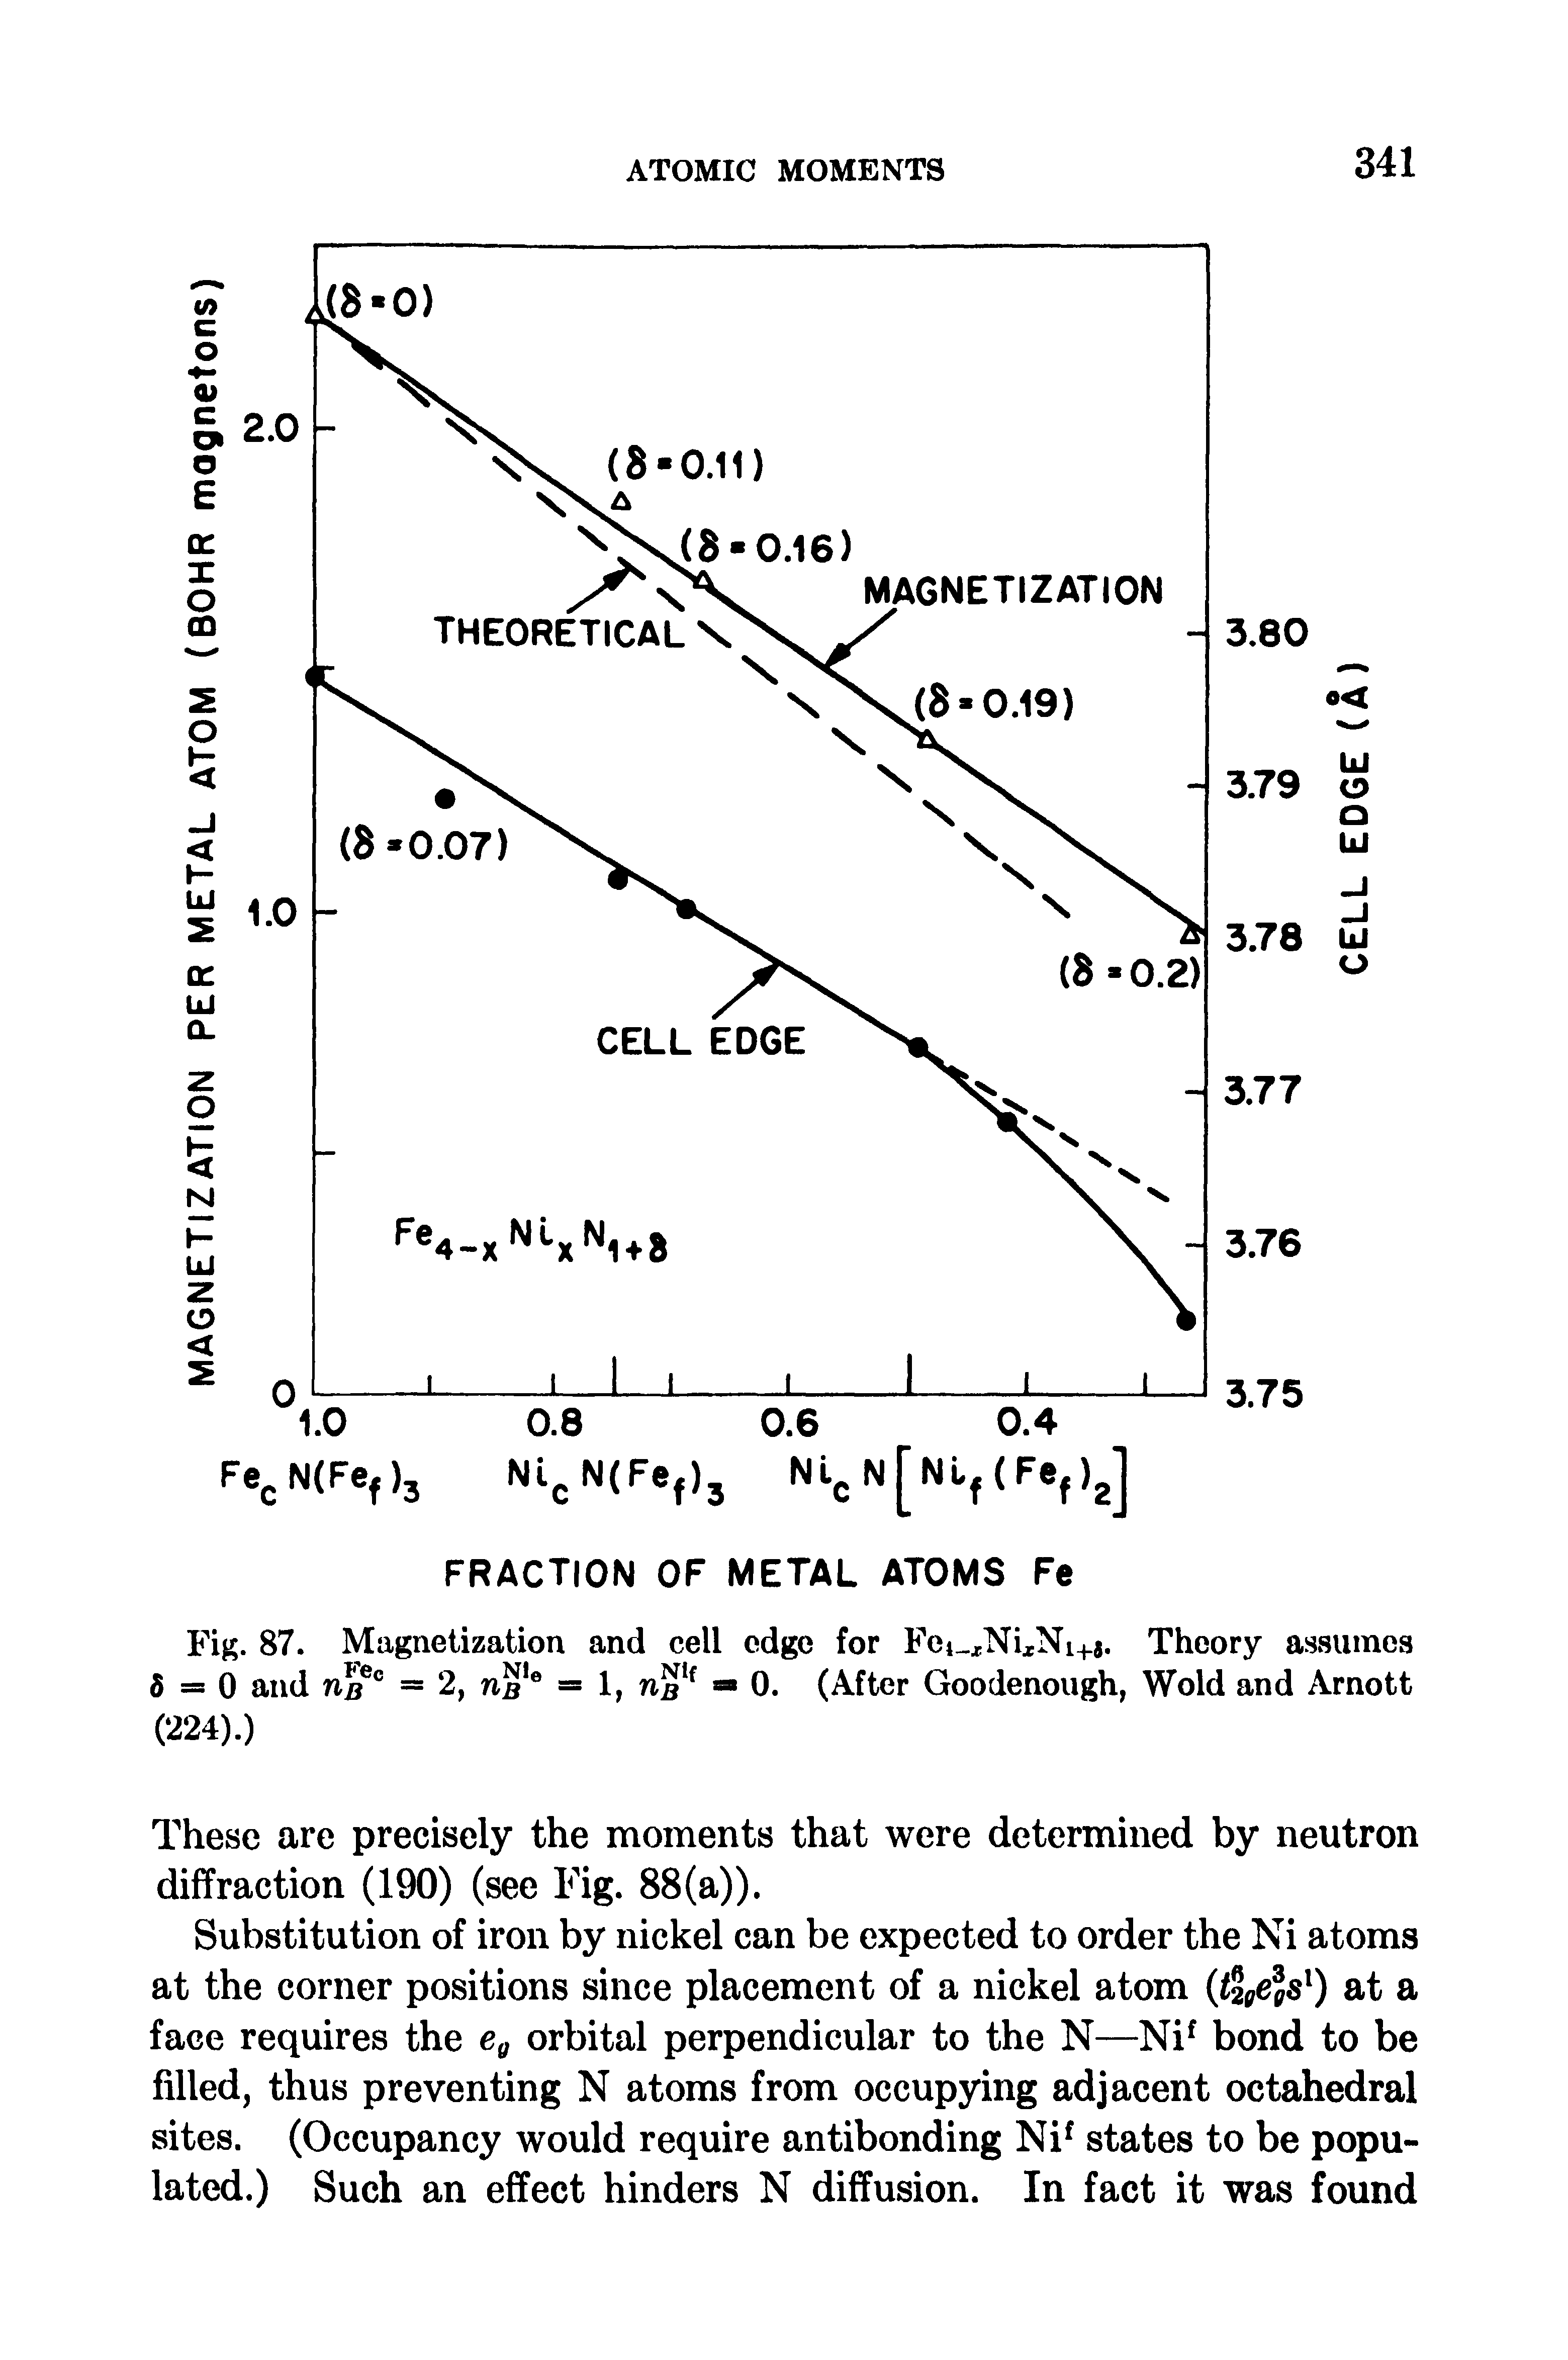 Fig. 87. Magnetization and cell edge for Fei. rNixNi+j. Theory assumes 5=0 and ubc = 2, n2,e = 1, nSIf 0. (After Goodenough, Wold and Arnott (224).)...